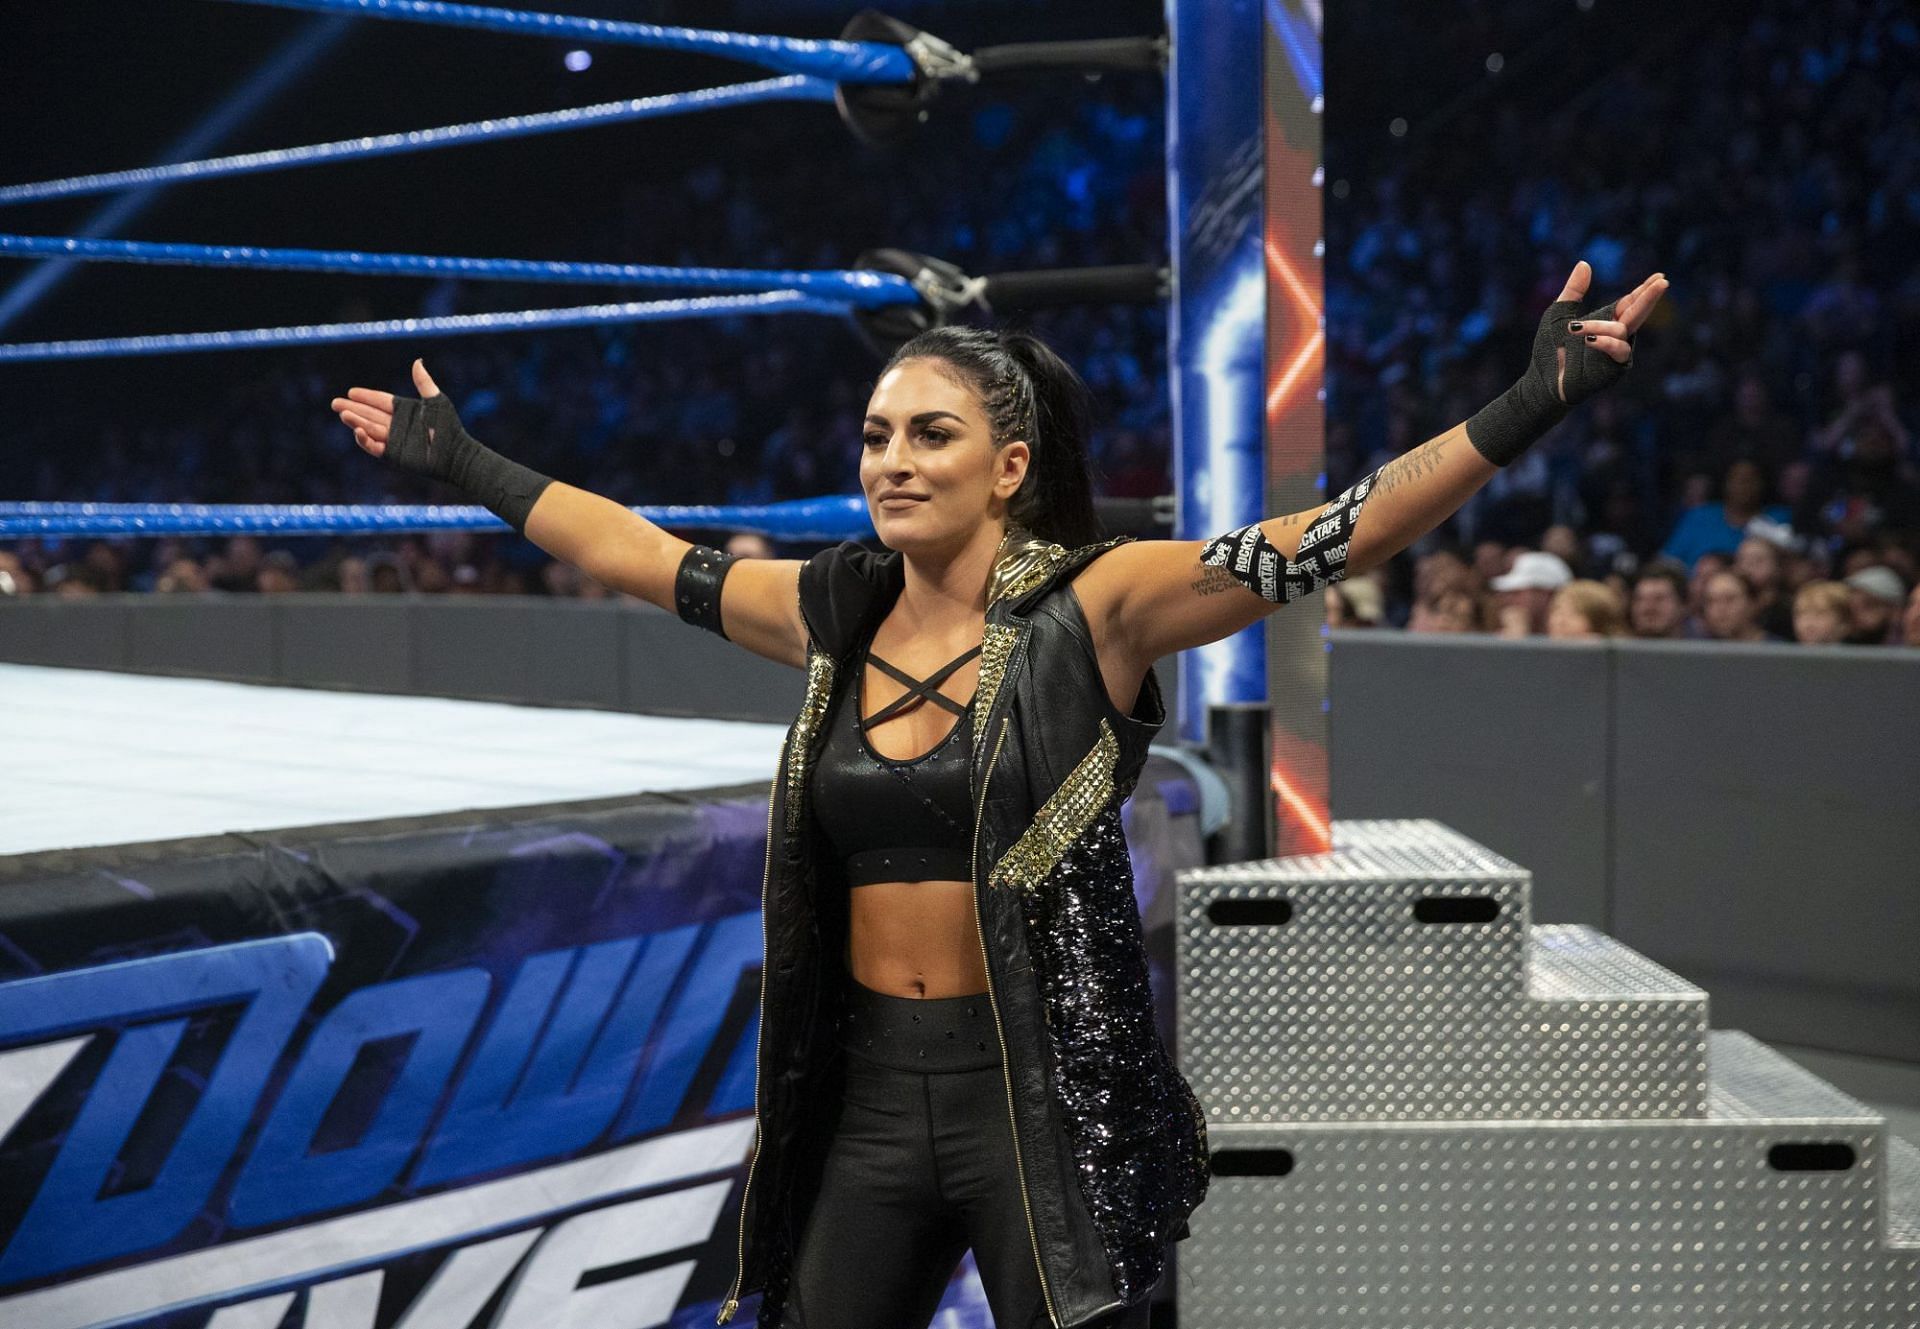 The former WWE official has her sights set high in 2022.